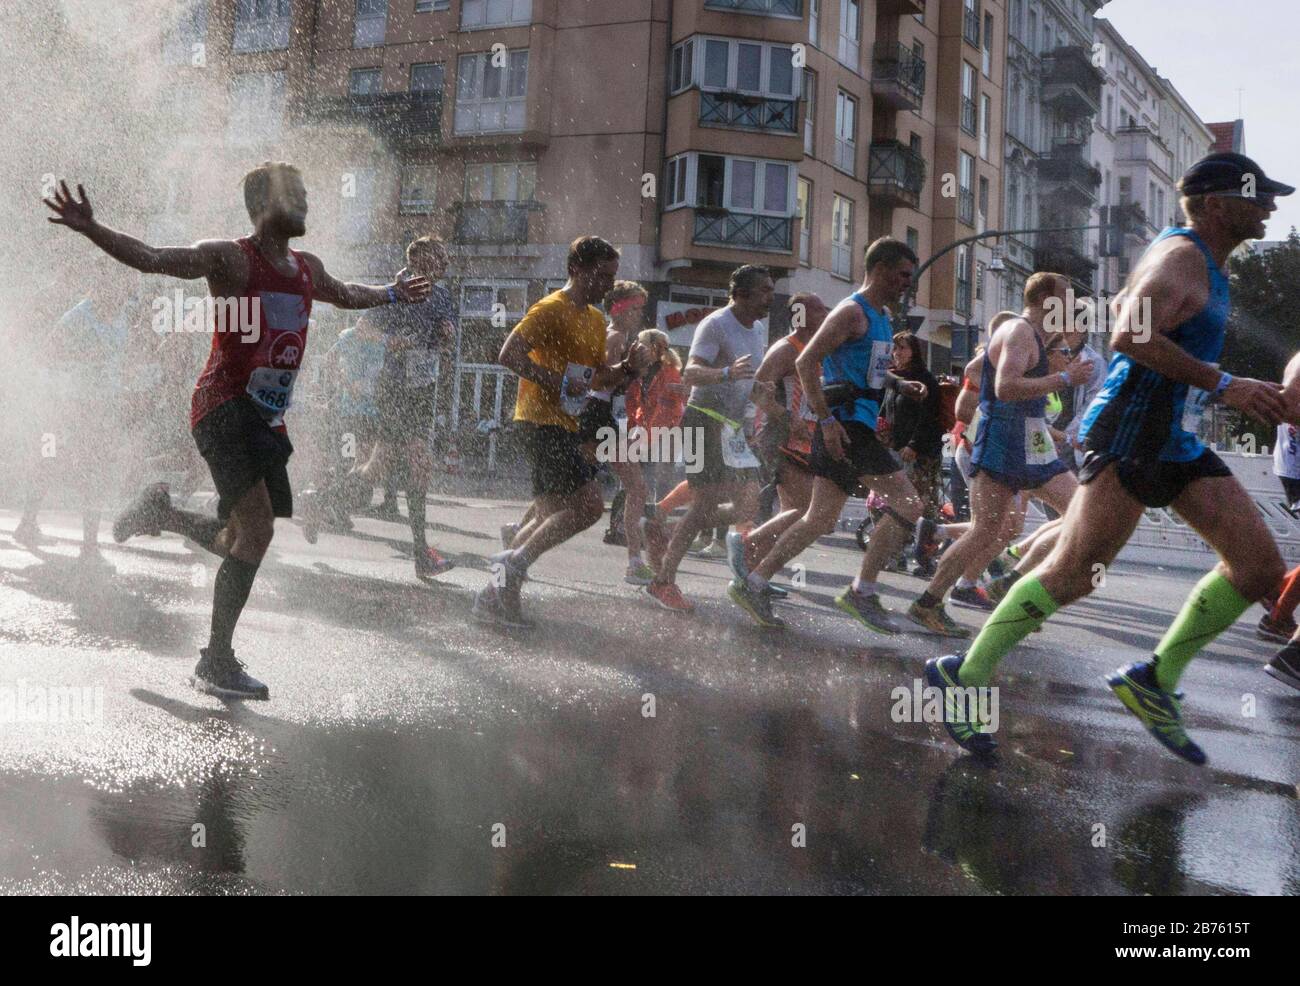 Participants in the 43rd Berlin Marathon in the Schoeneberg district of Berlin will be cooled off with a water shower. 41,283 runners participated in the marathon. [automated translation] Stock Photo